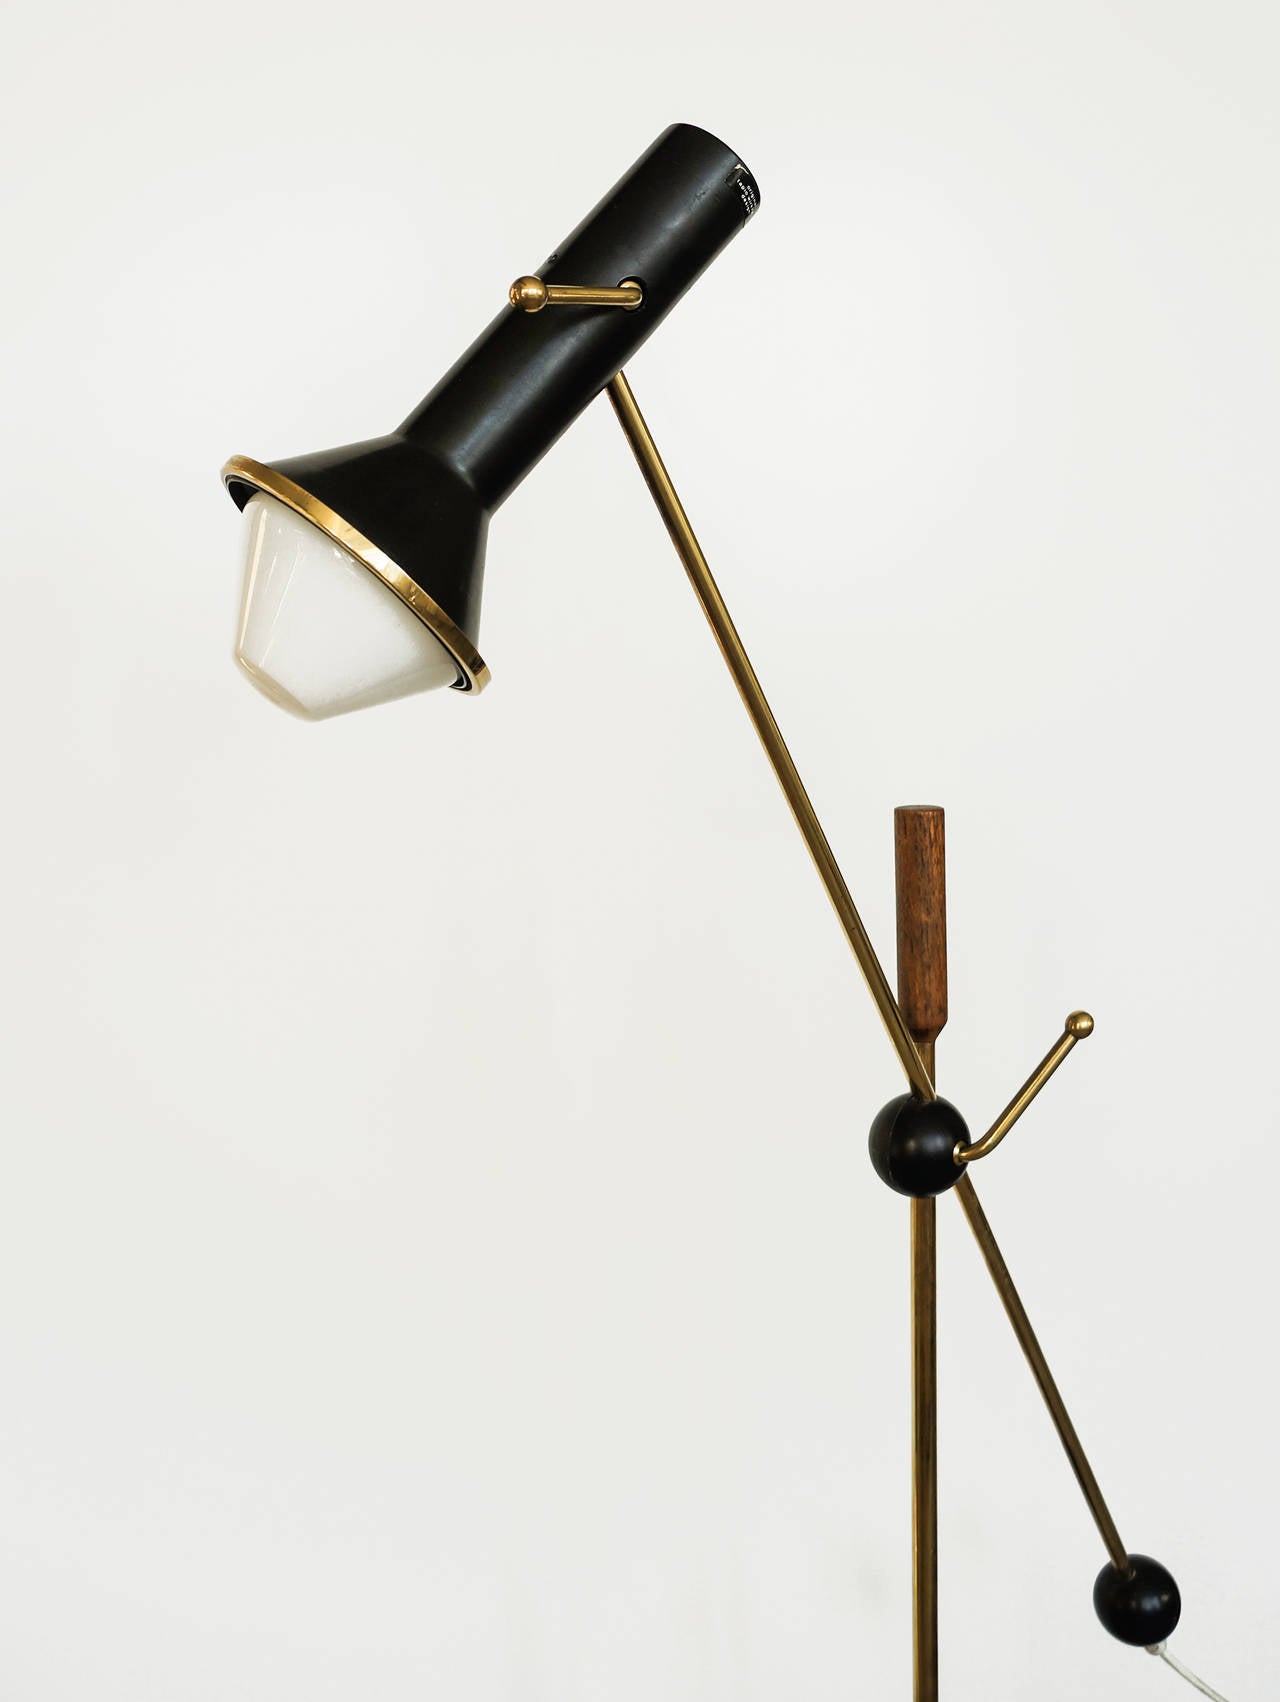 Tapio Wirkkala.

Adjustable floor lamp, model K10-47.

Idman Oy, Finland, 1960.
Brass, painted steel/aluminum, teak, solid painted iron base.
Adjustable height circa 105-150 cm.

Shade impressed with manufacturer's label Idman. Also labelled